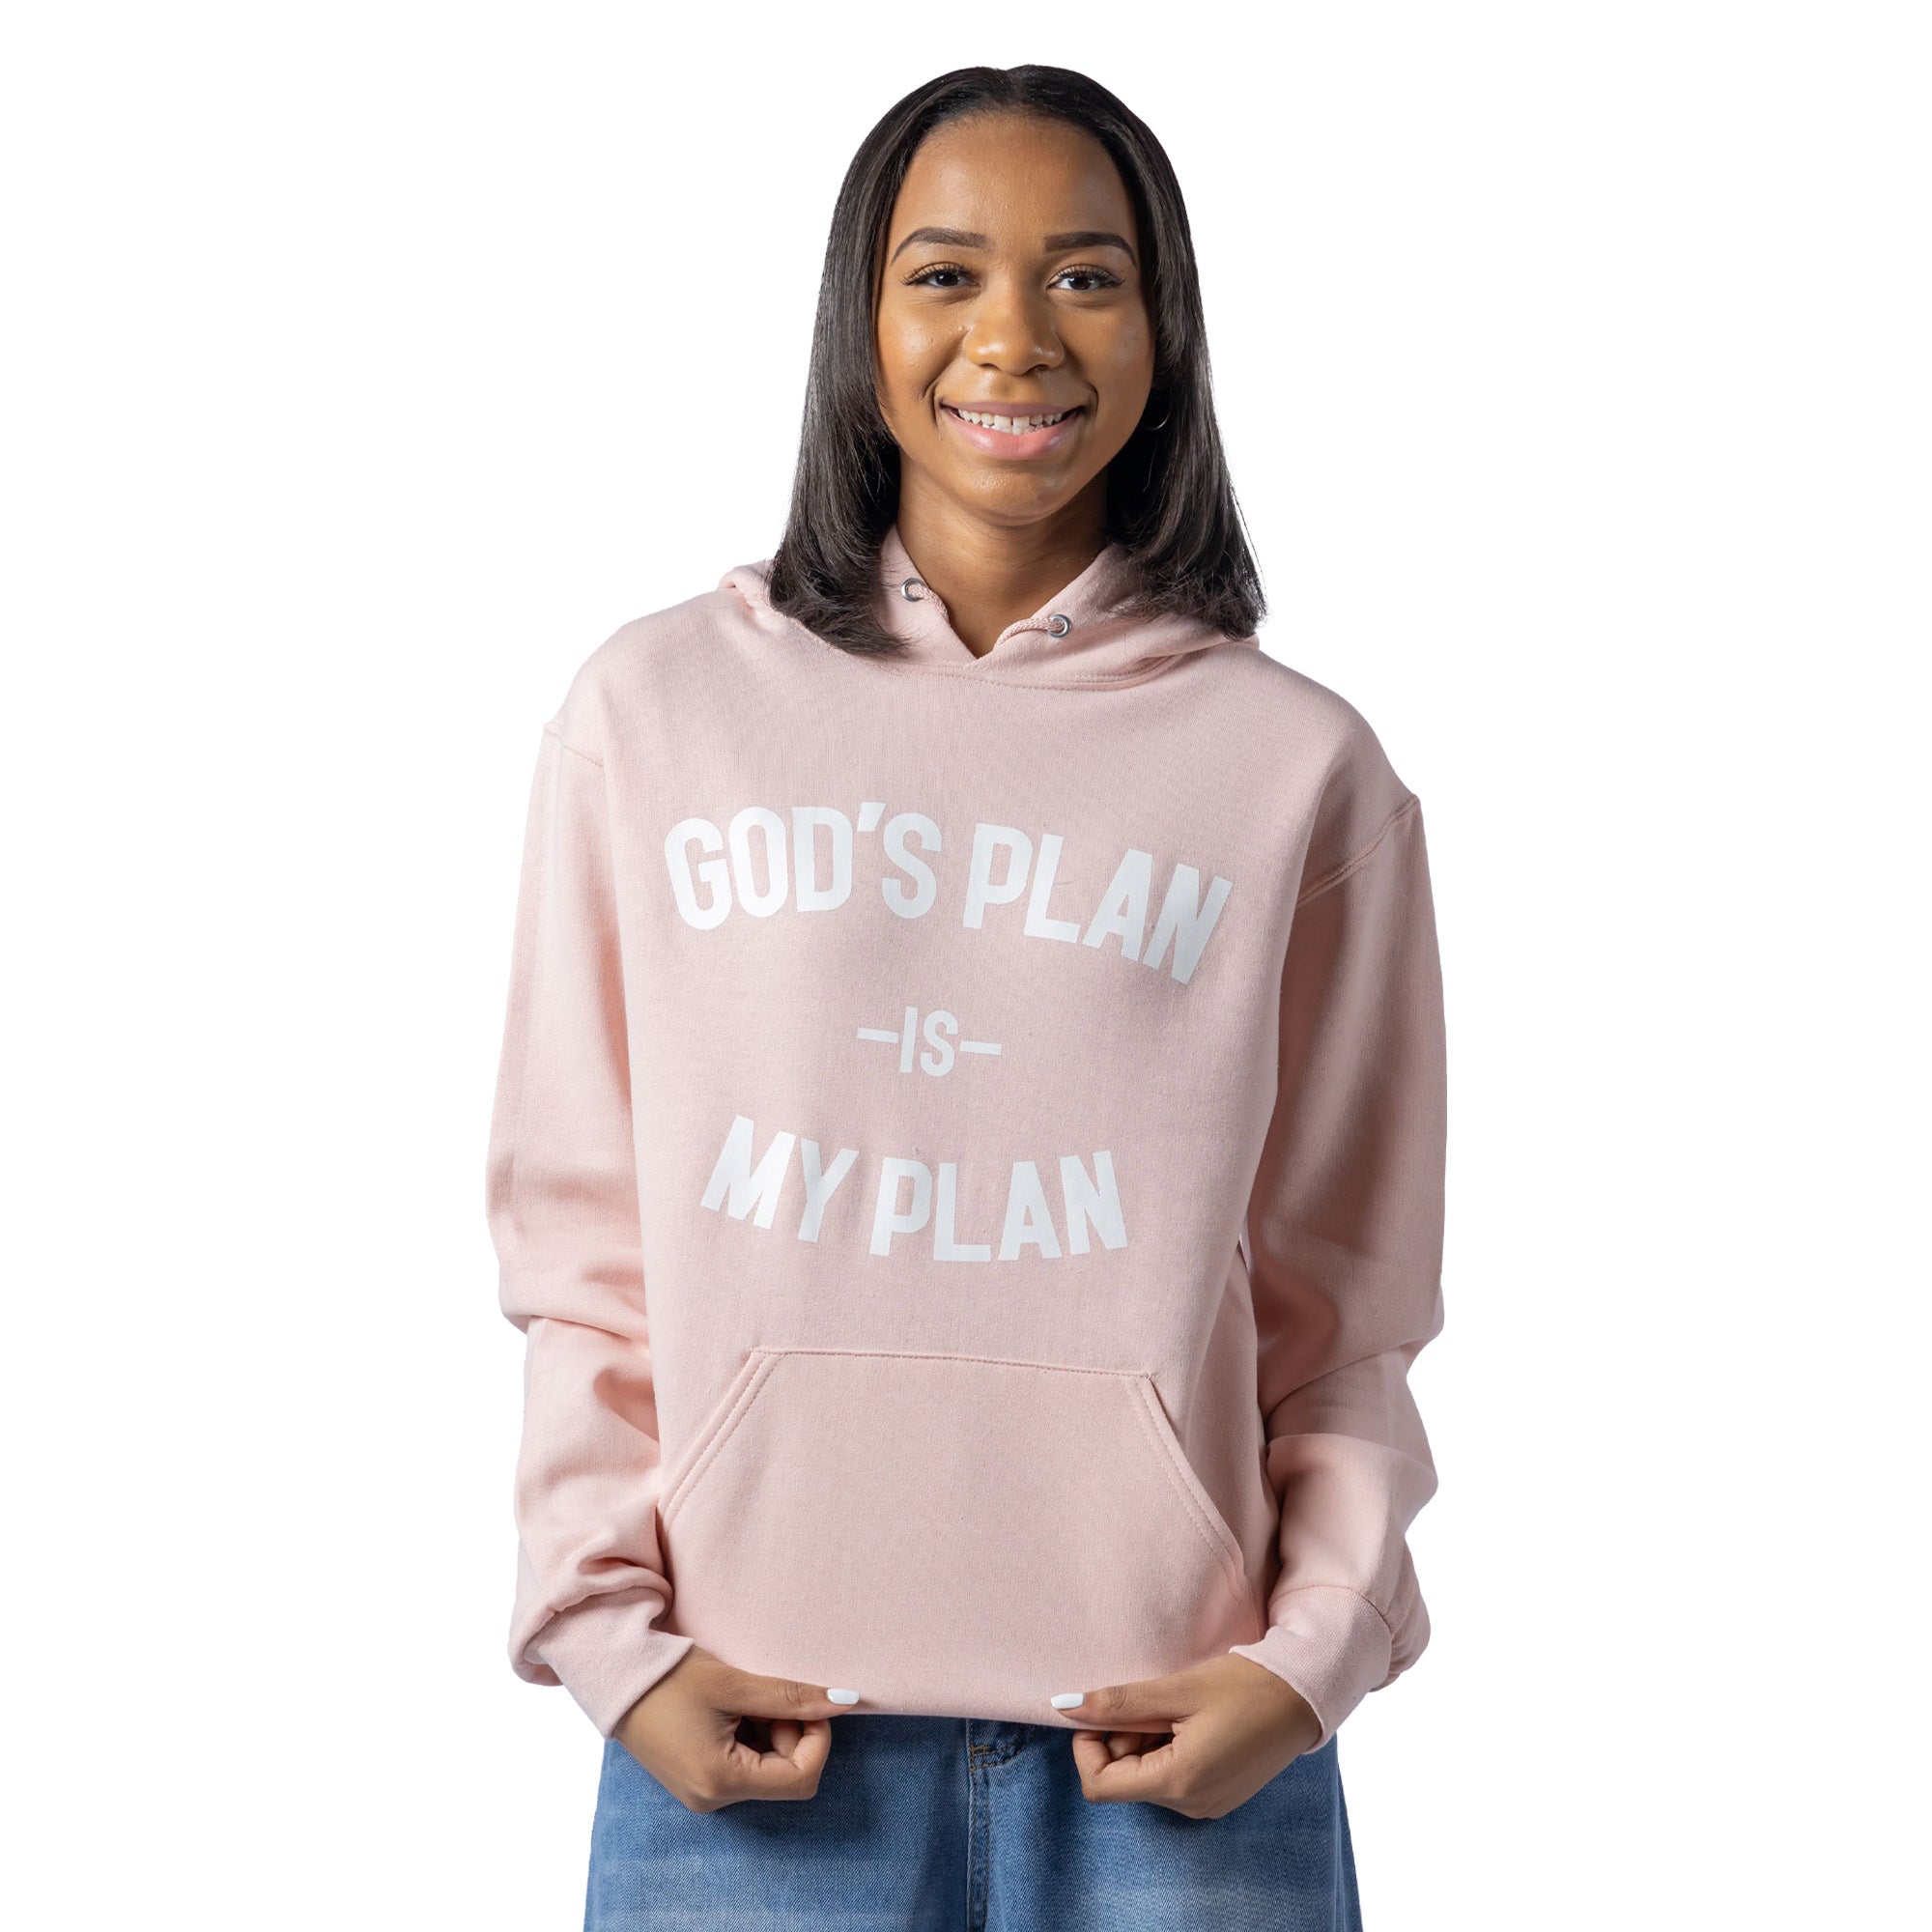 God's Plan My Plan (Dusty Mauve), Used By God, Used By God Clothing, Christian Apparel, Christian Hoodies, Christian Clothing, Christian Shirts, God Shirts, Christian Sweatshirts, God Clothing, Jesus Hoodie, christian clothing t shirts, Jesus Clothes, t-shirts about jesus, hoodies near me, Christian Tshirts, God Is Dope, Art Of Homage, Red Letter Clothing, Elevated Faith, Active Faith Sports, Beacon Threads, God The Father Apparel